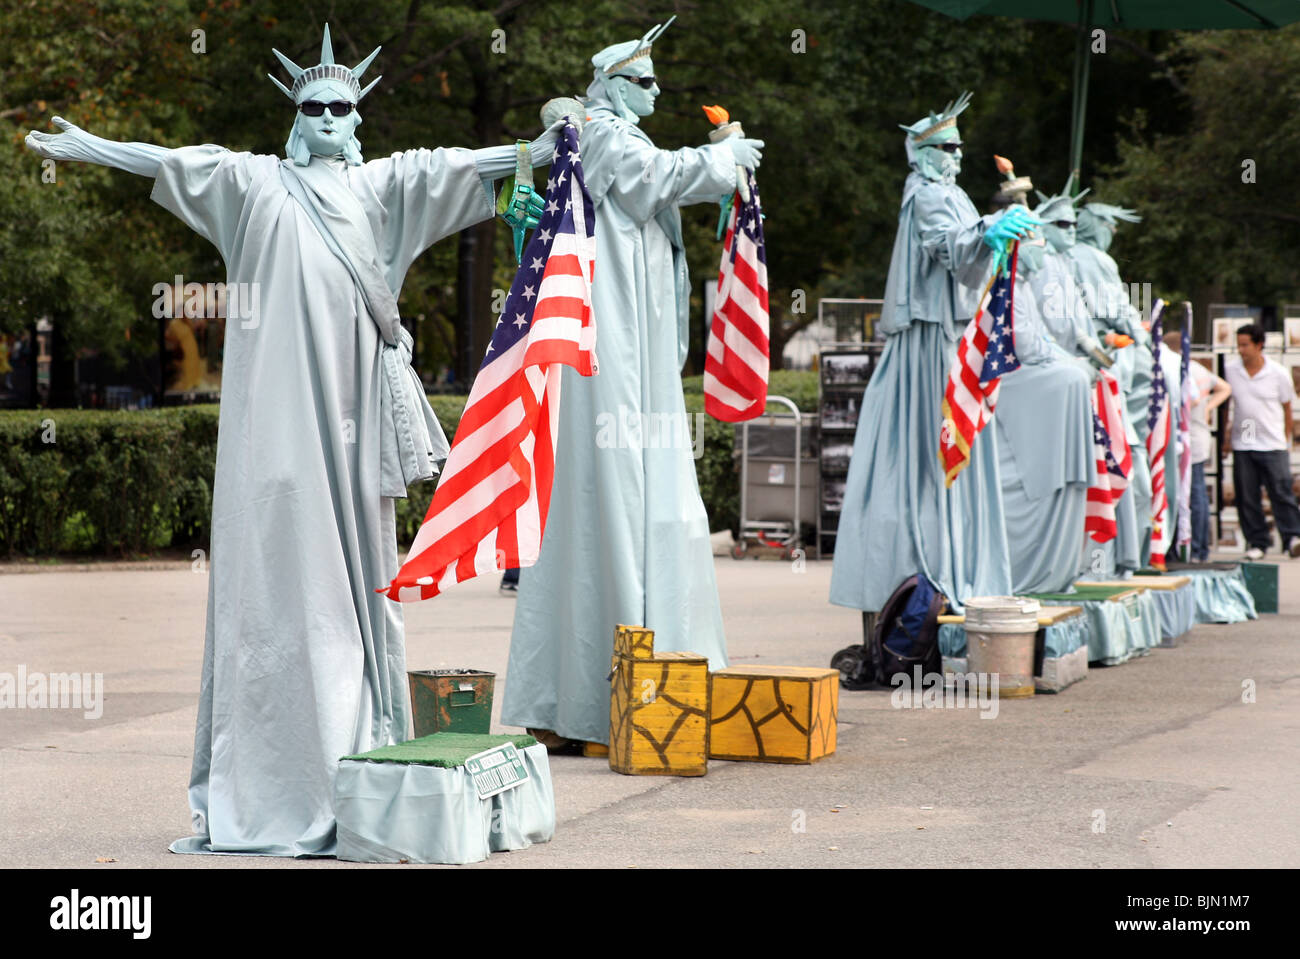 Performance artists dressed as the Statue of Liberty in New York Stock Photo